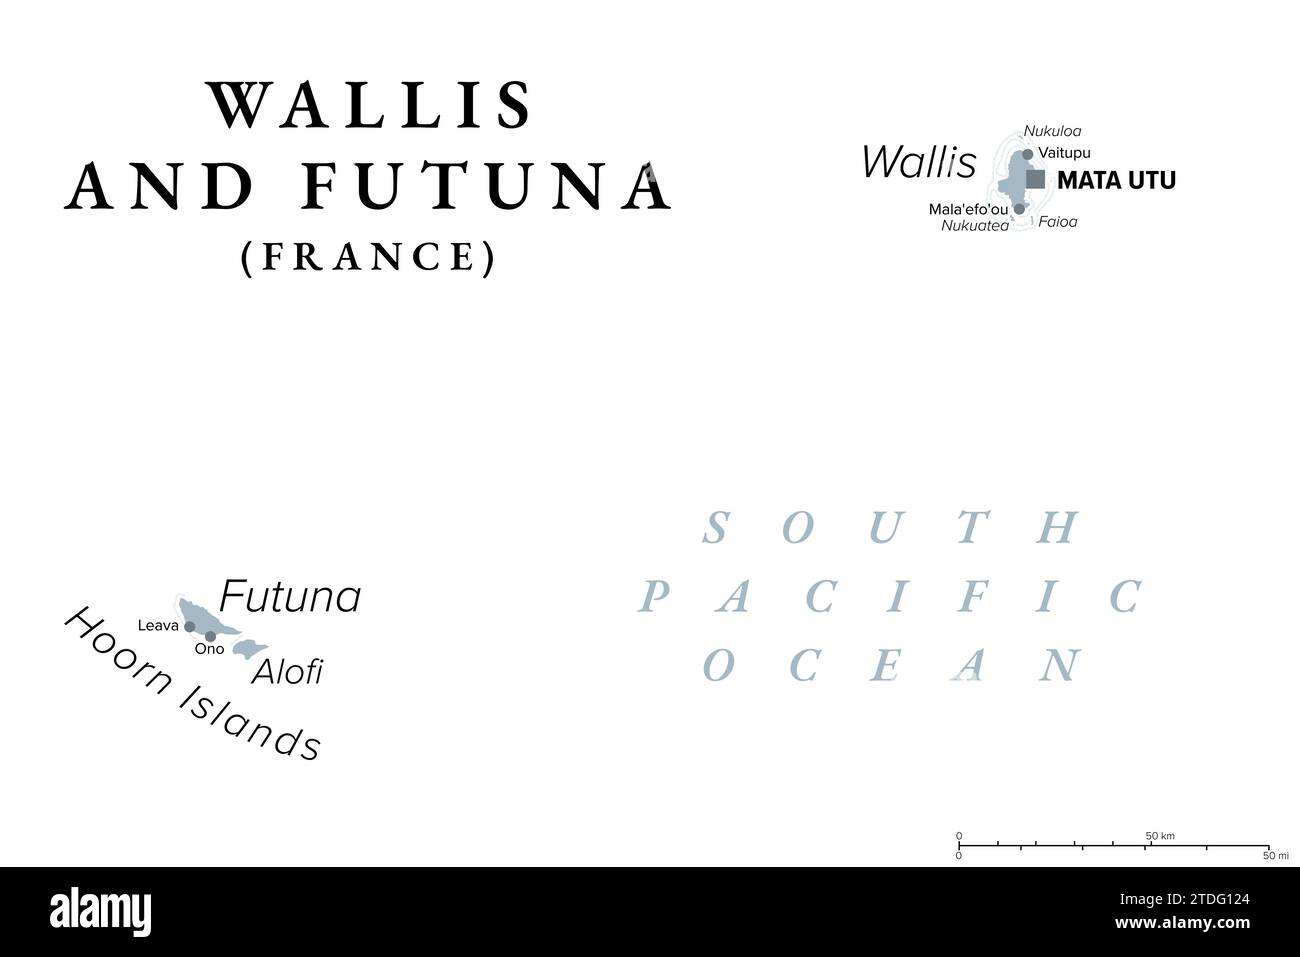 Wallis and Futuna, gray political map. Island collectivity of France in the South Pacific with capital Mata Utu. Stock Photo